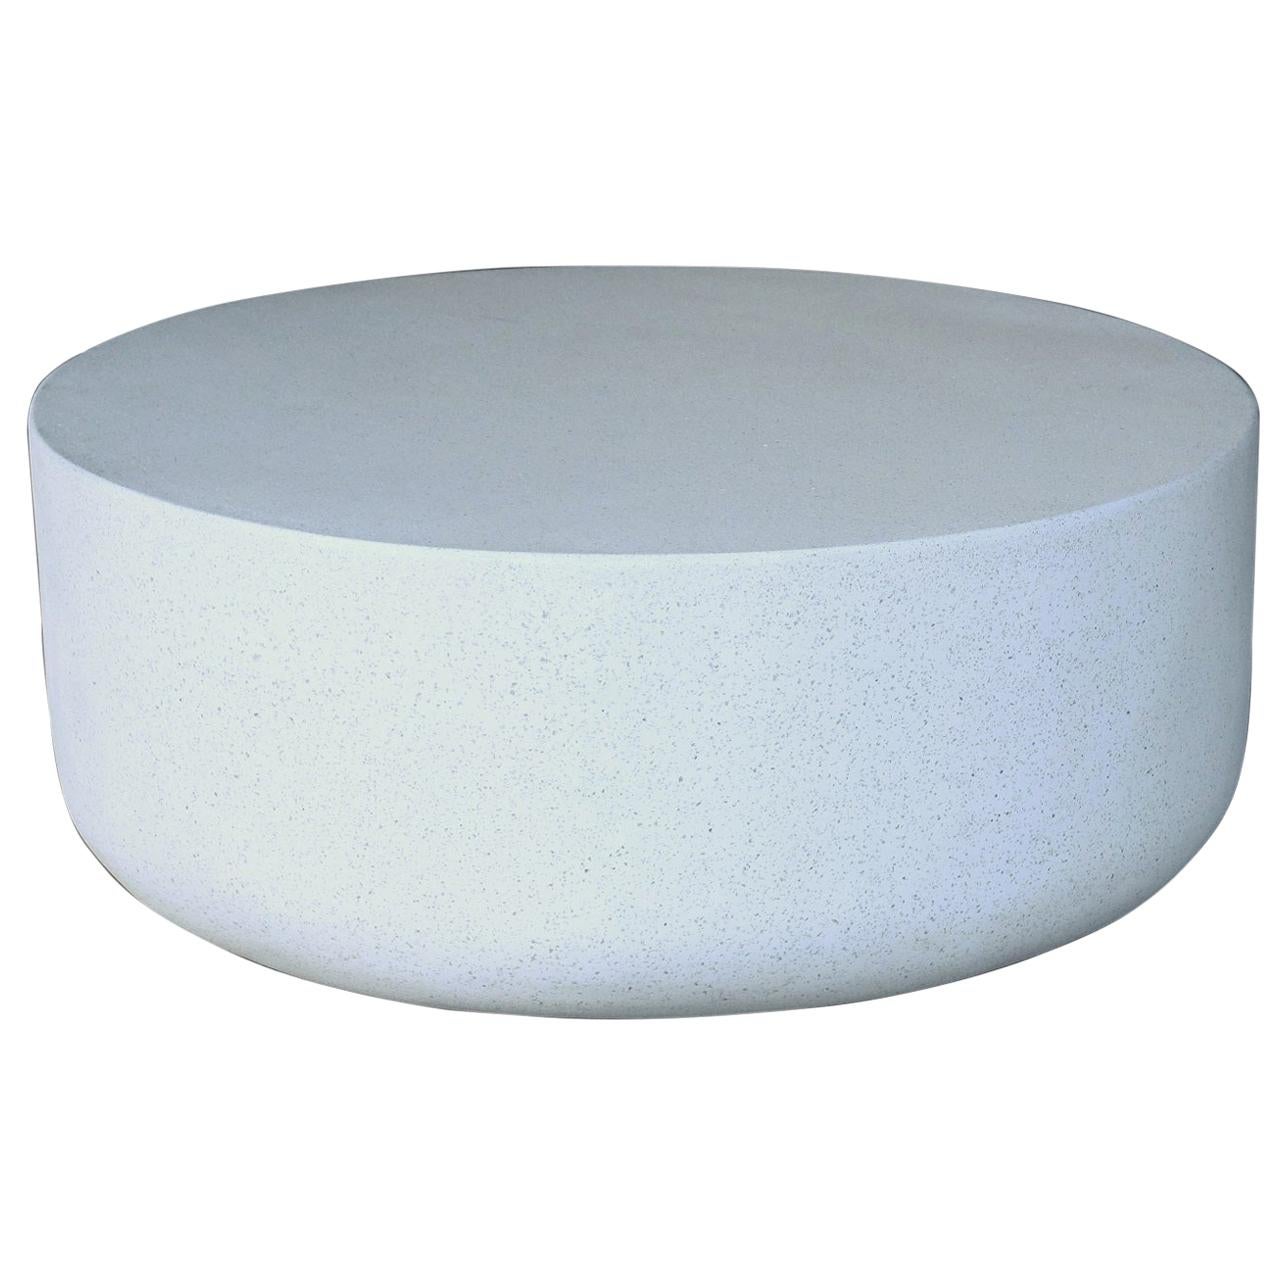 Cast Resin 'Millstone' Low Table, White Stone Finish by Zachary A. Design